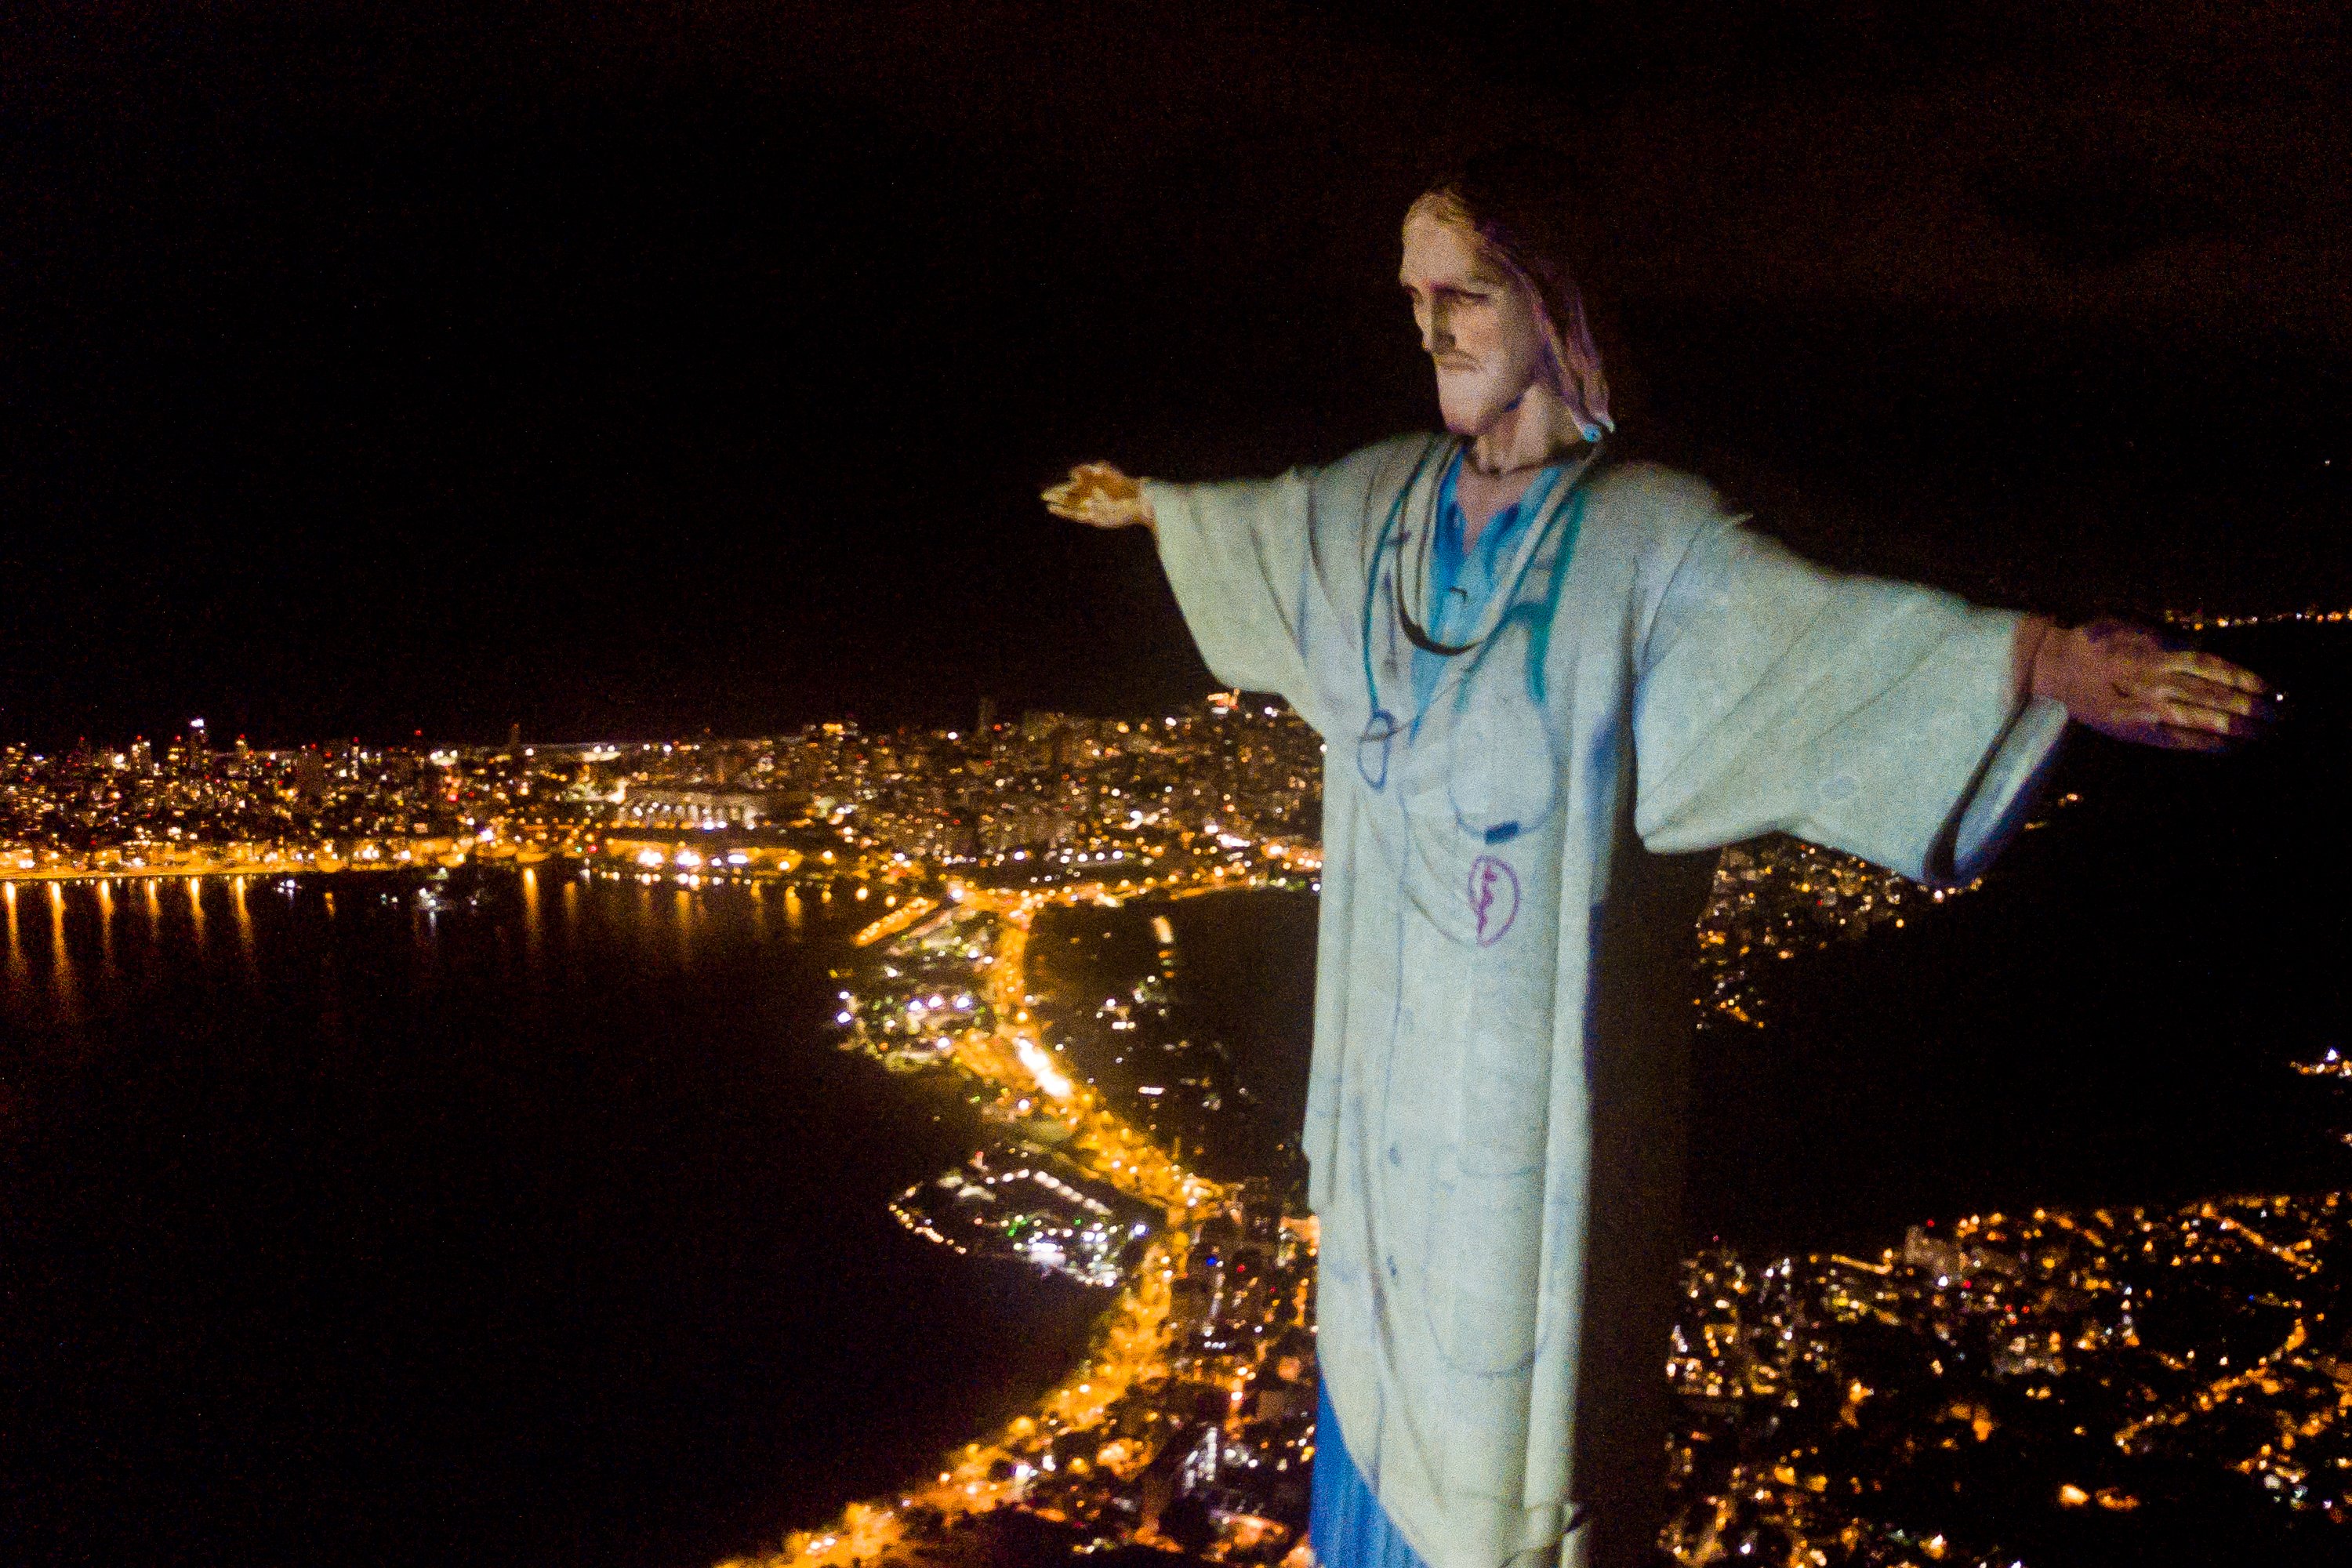 Rio de Janeiro Used Cutting-Edge Technology to Transform Its Giant Jesus  Statue Into a Doctor to Honor Healthcare Workers